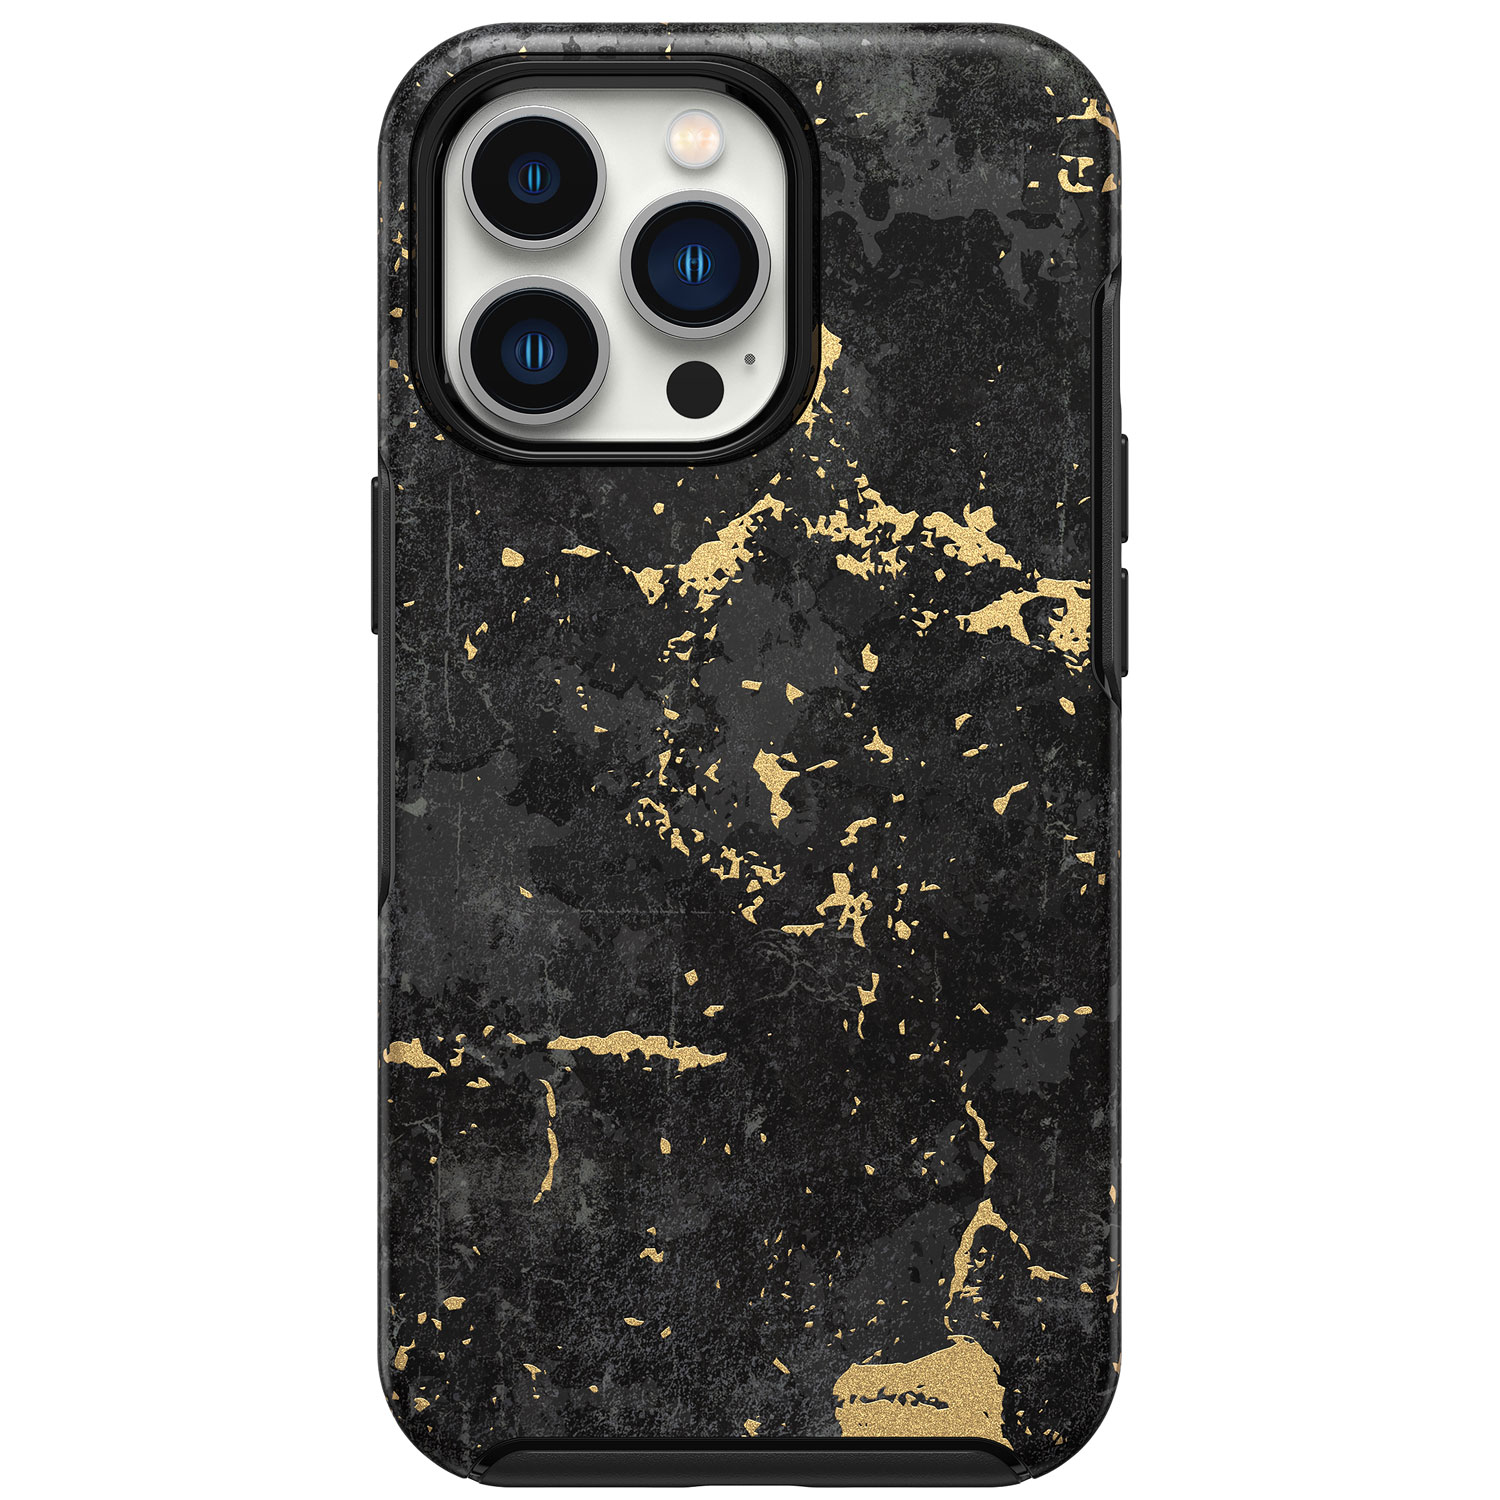 OtterBox Symmetry Fitted Hard Shell Case for iPhone 13 Pro - Enigma Graphic